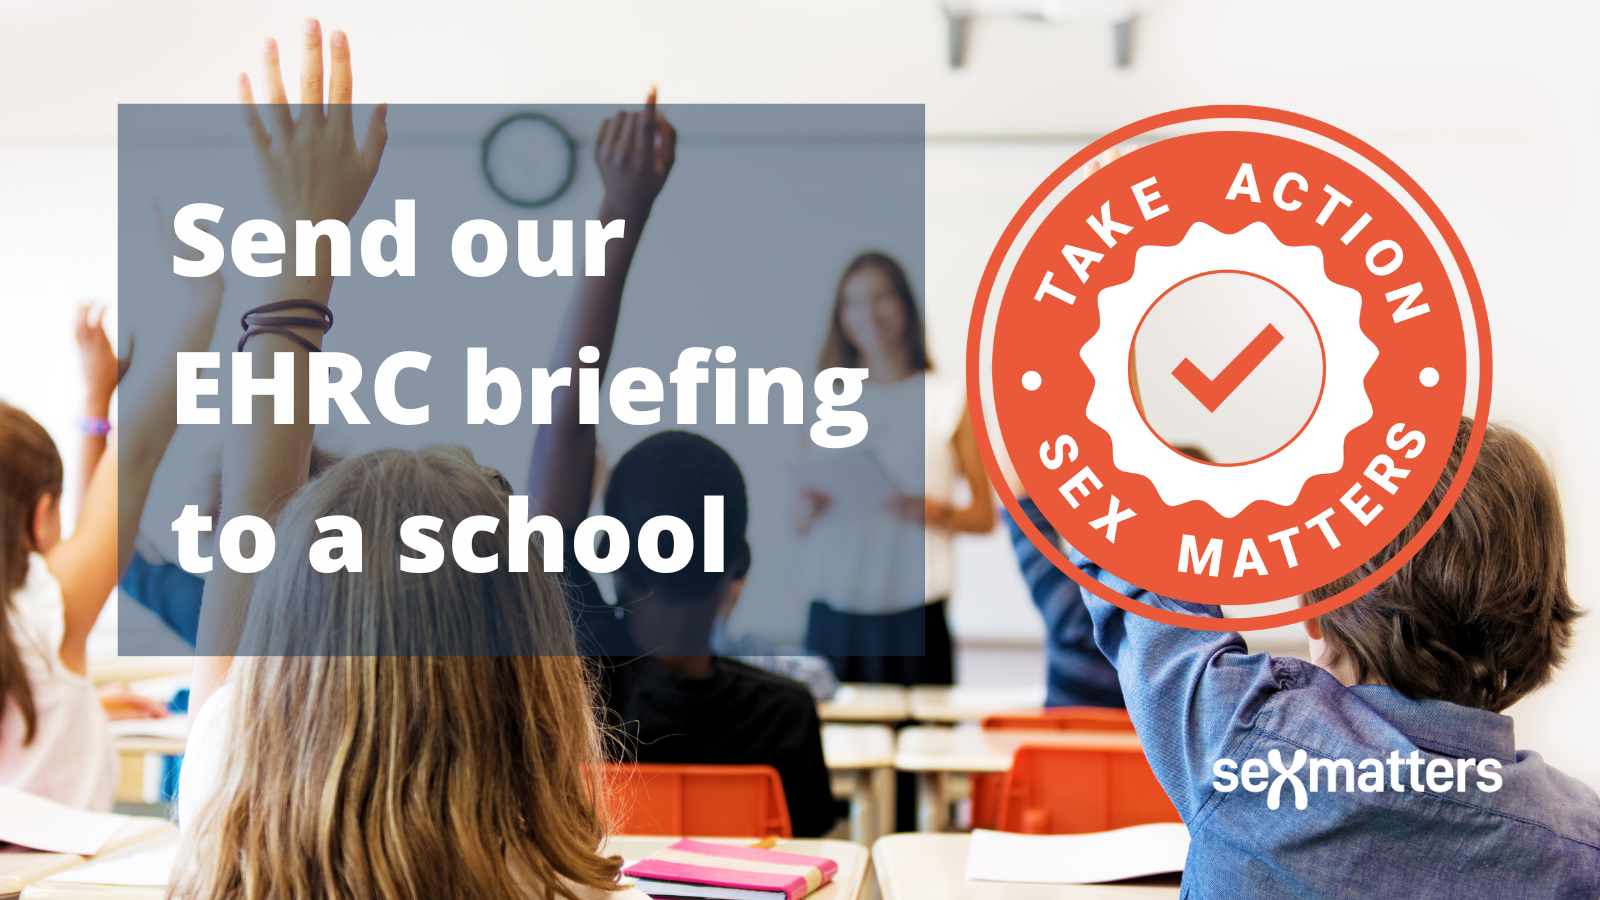 Send our EHRC briefing to a school